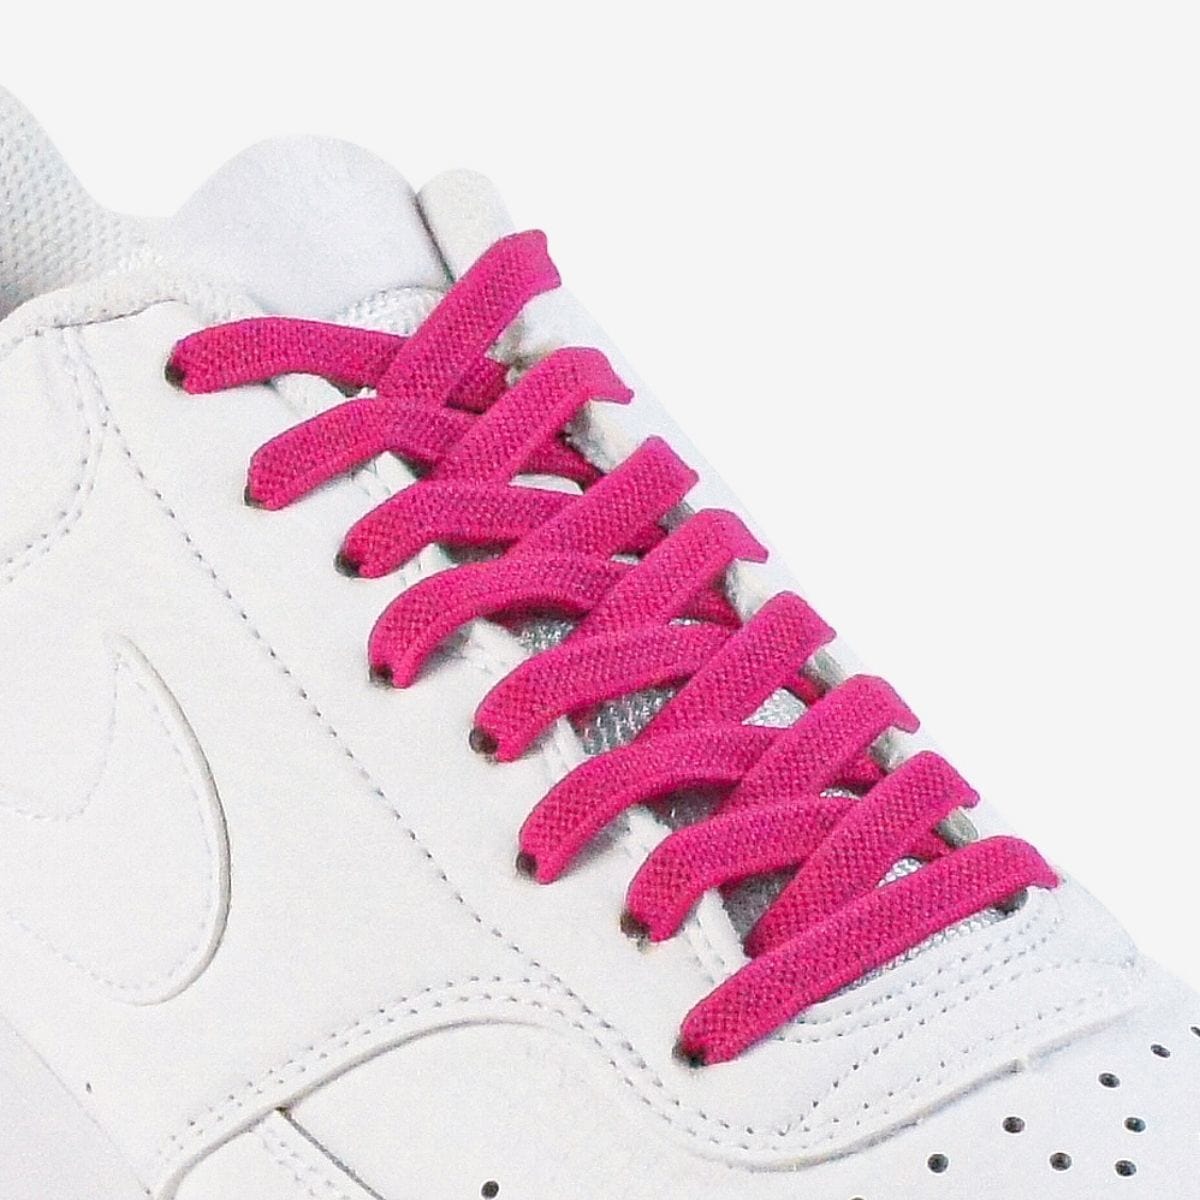 kids-no-tie-shoelaces-with-rose-pink-laces-on-nike-white-sneakers-by-kicks-shoelaces